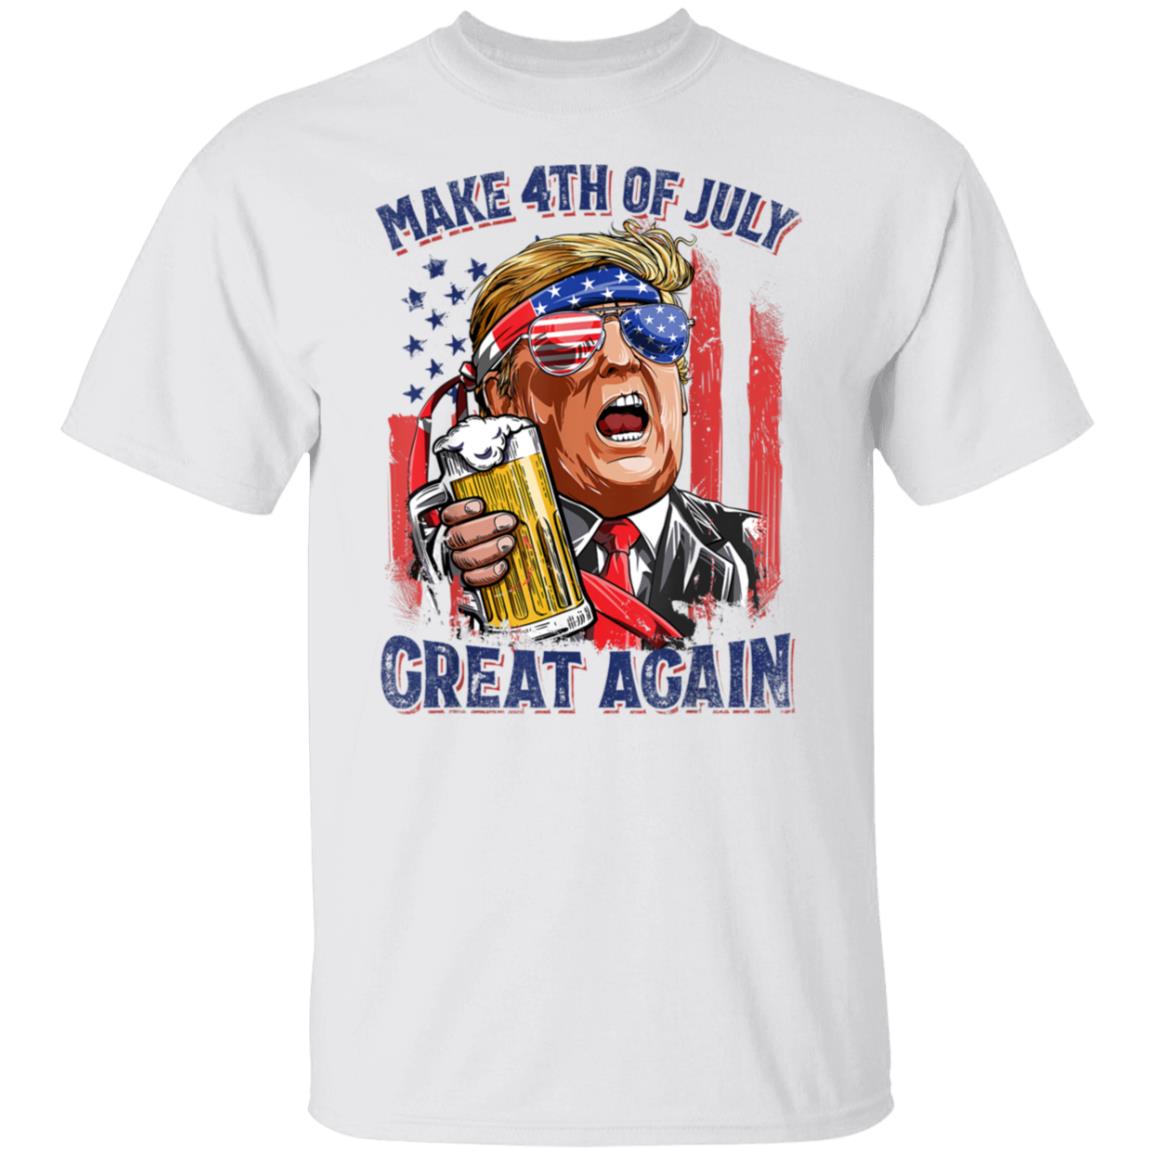 Make 4th of July Great Again Funny Trump Men Drinking Beer T-Shirt